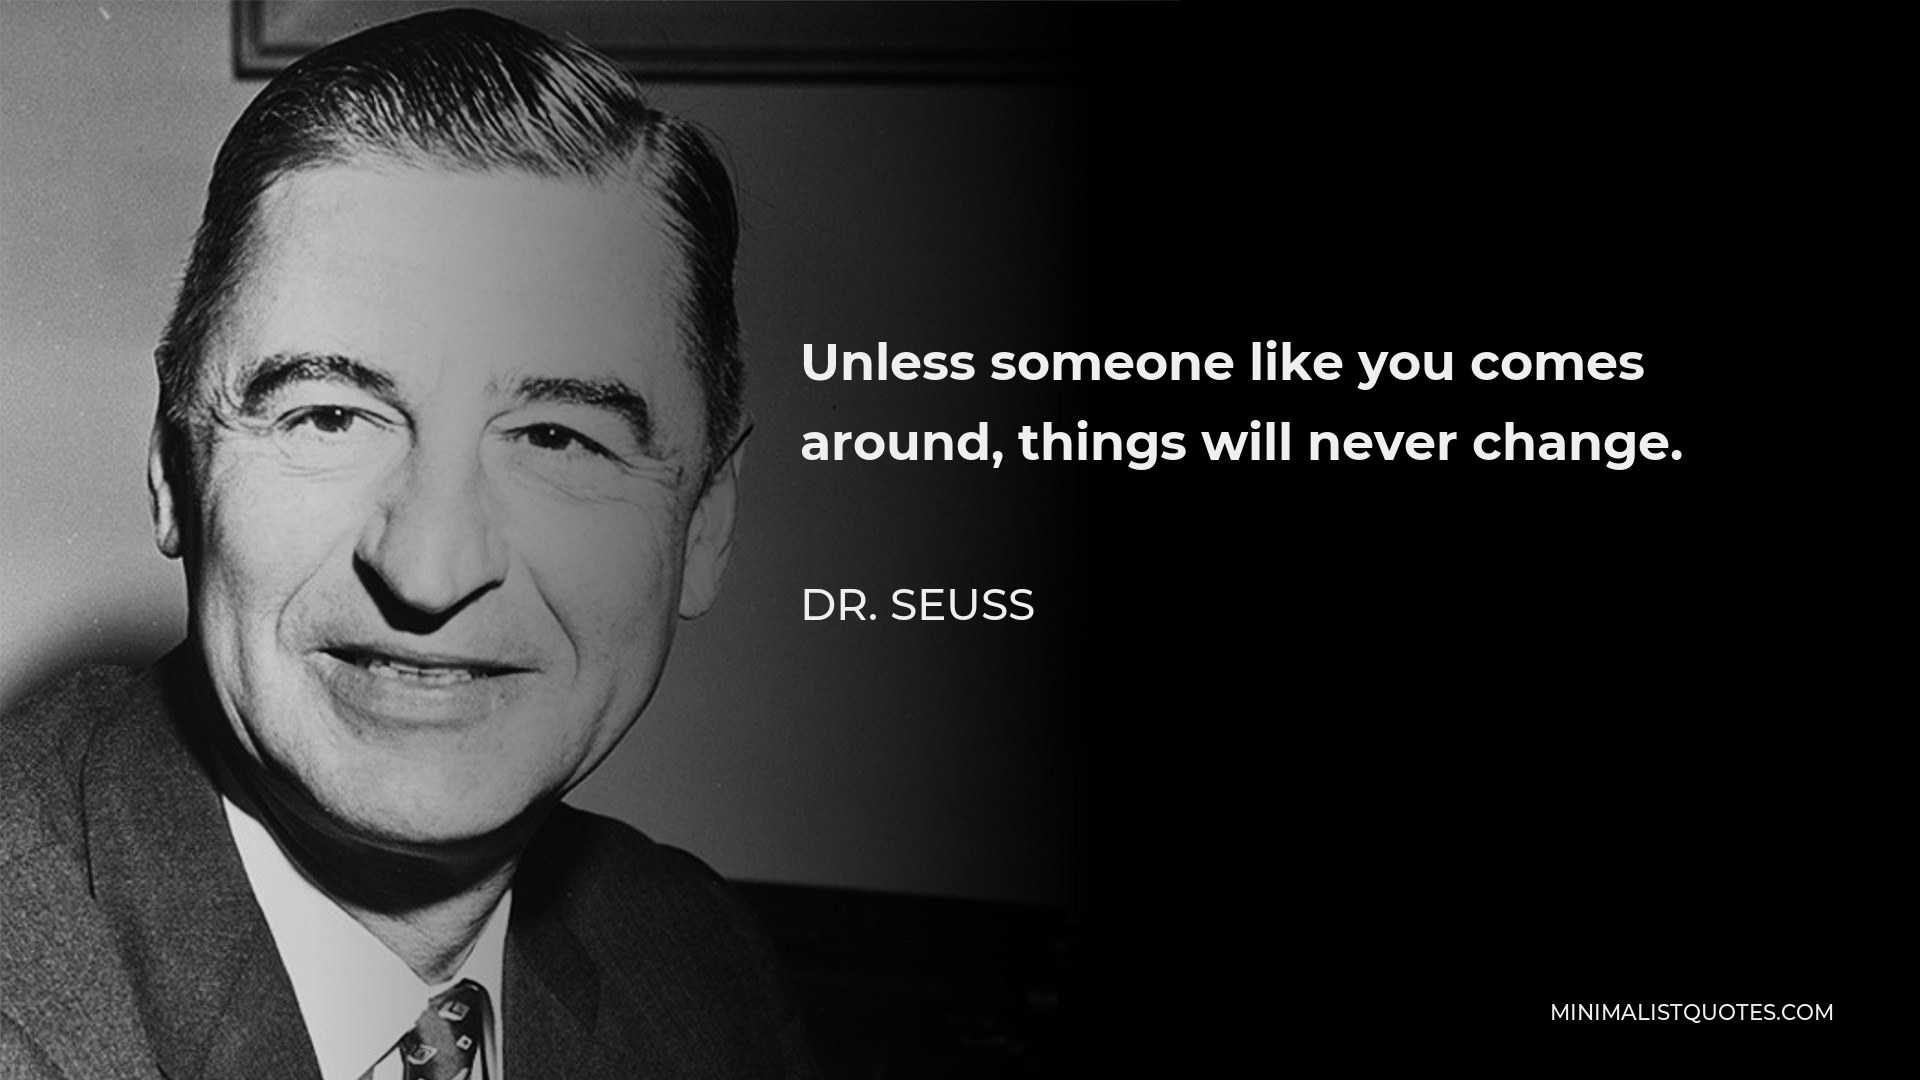 Dr. Seuss Quote - Unless someone like you comes around, things will never change.